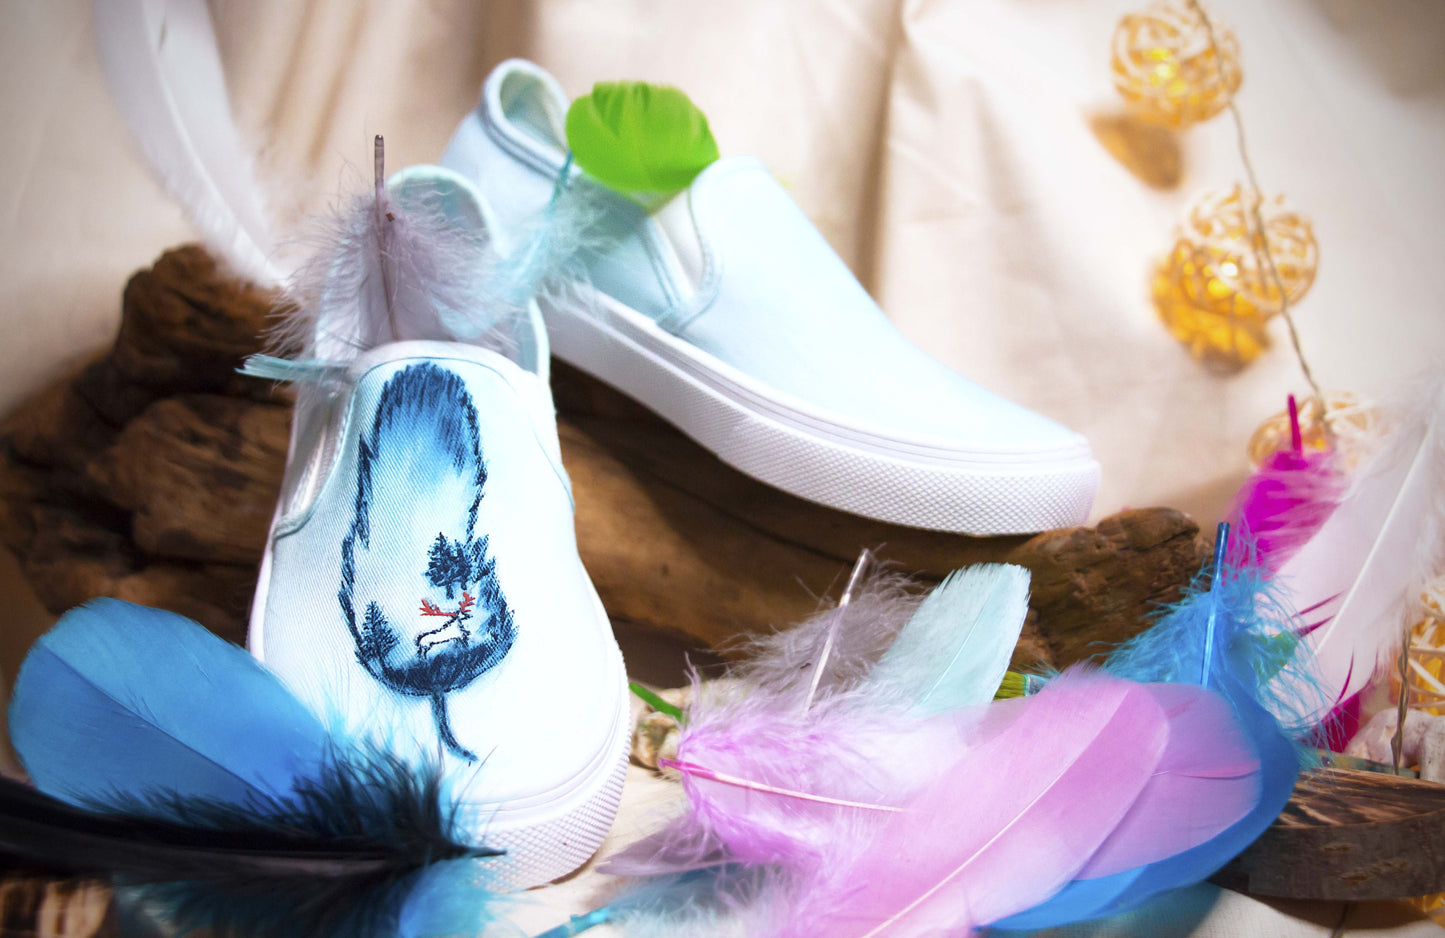 Tenisi Pictati, Painted Sneakers, Pictura Manuala Tenisi, handmade shoes, Everyday shoes, Woman Fashion, customized shoes, Dandelion, Feather, Nature, Animal Spirit, Meaning painting, look inside